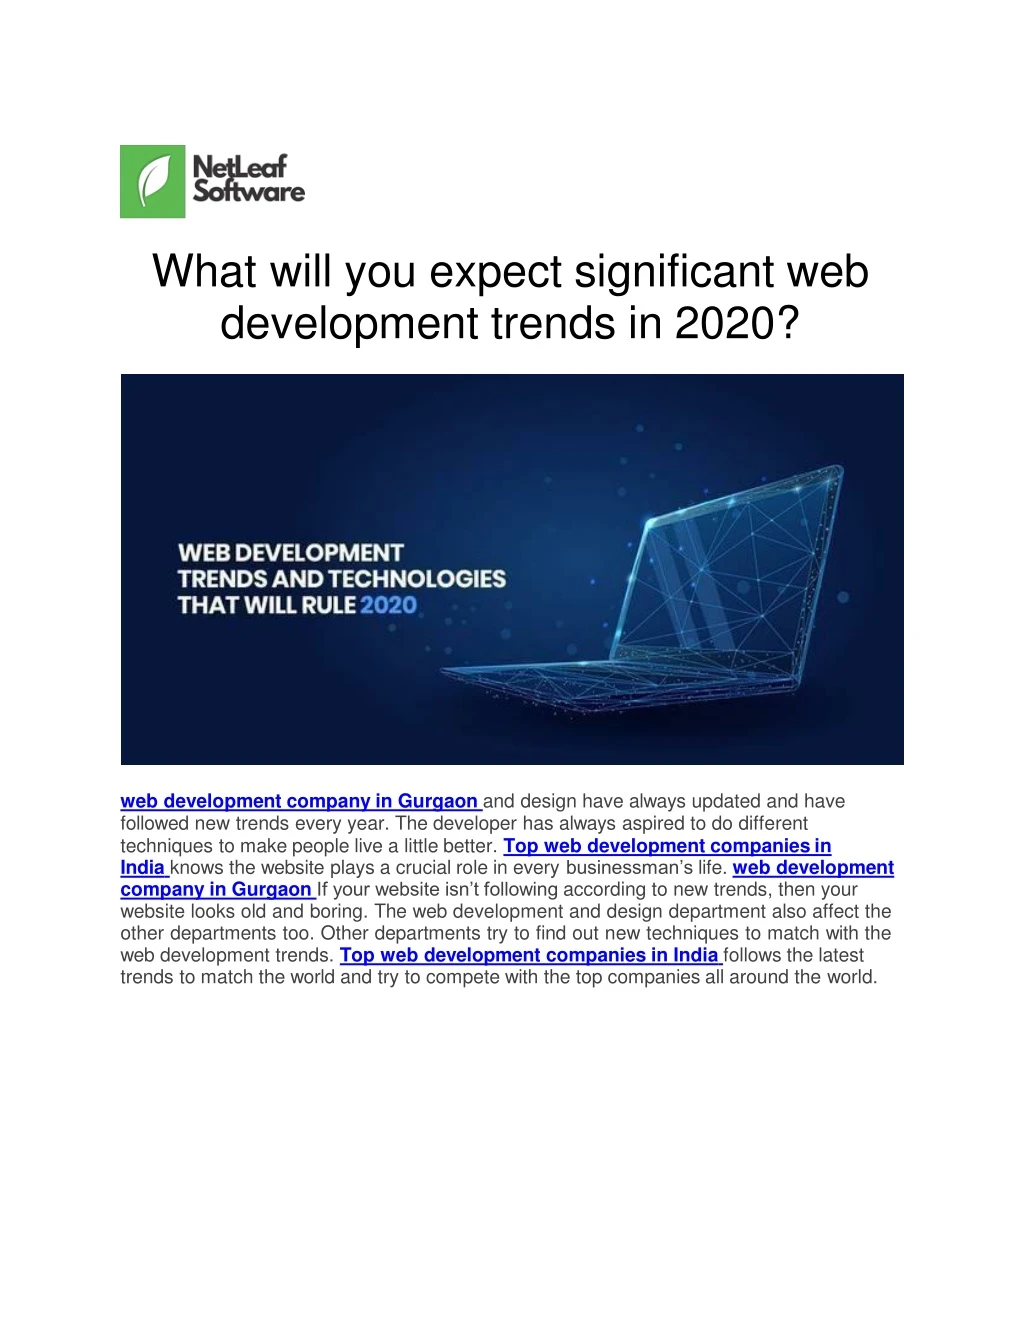 what will you expect significant web development trends in 2020